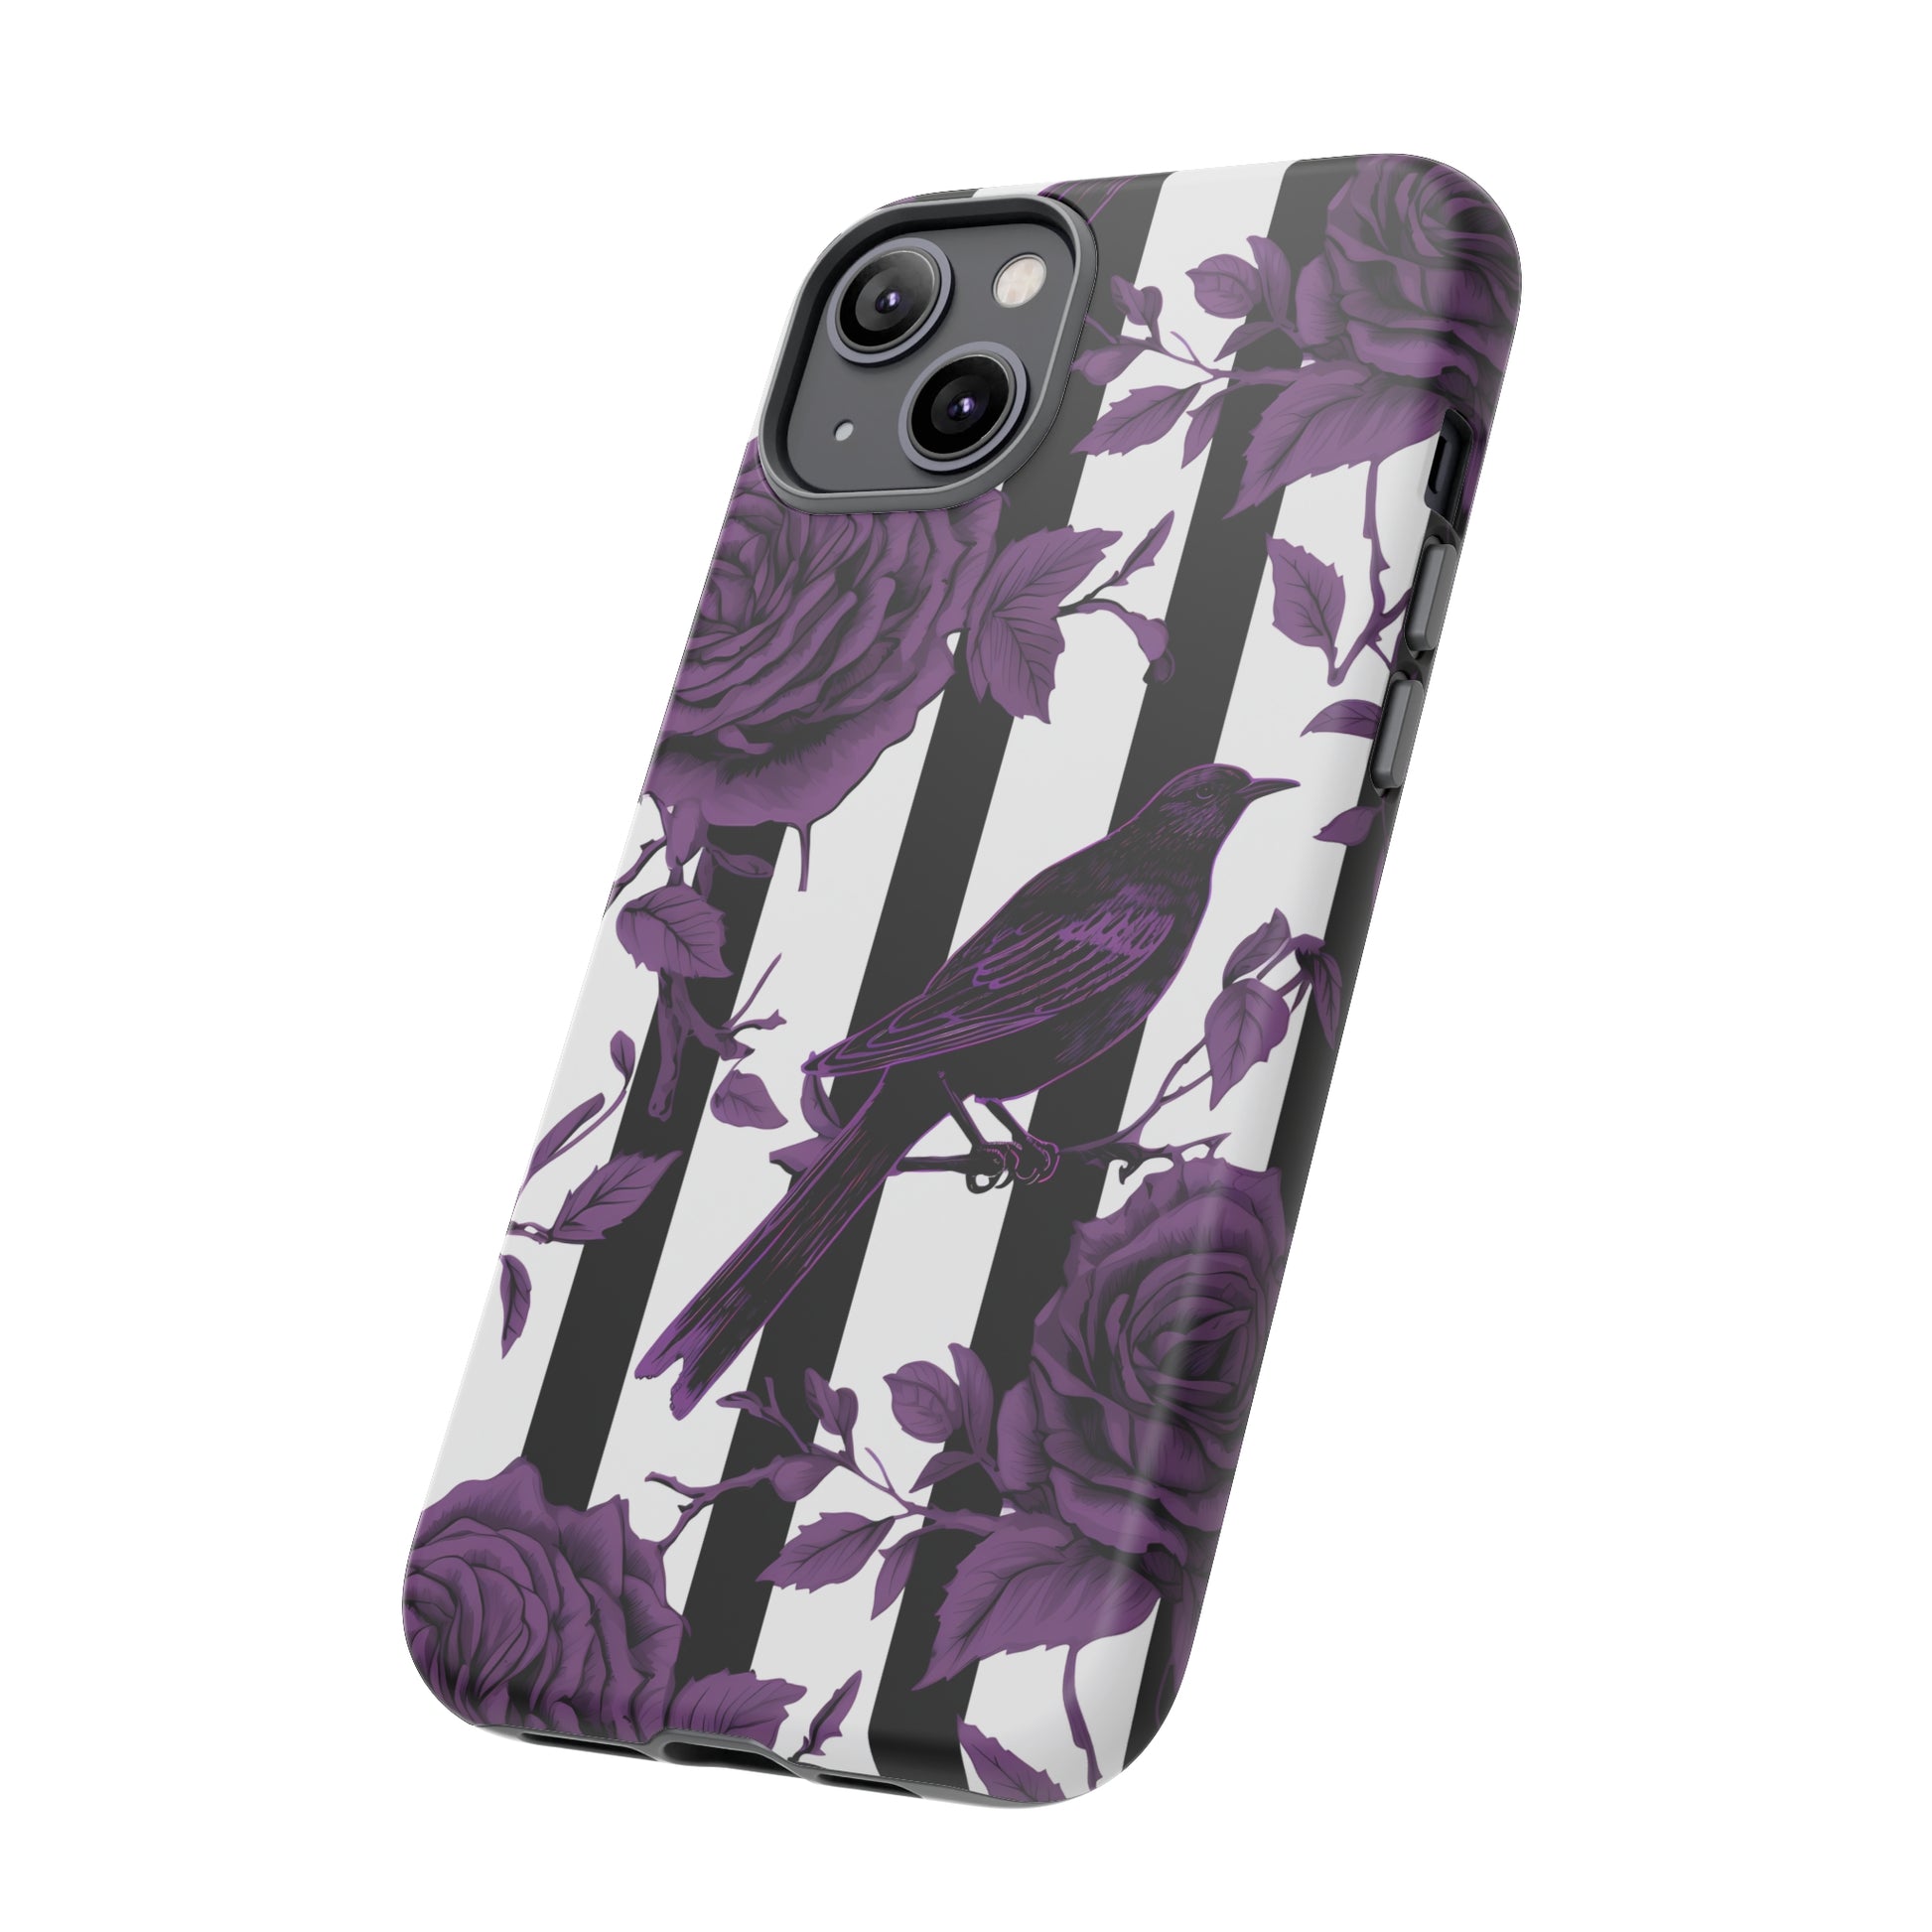 Striped Crows and Roses Tough Cases for iPhone Samsung Google PhonesPhone CaseVTZdesignsGoogle Pixel 7GlossyAccessoriescrowsGlossy